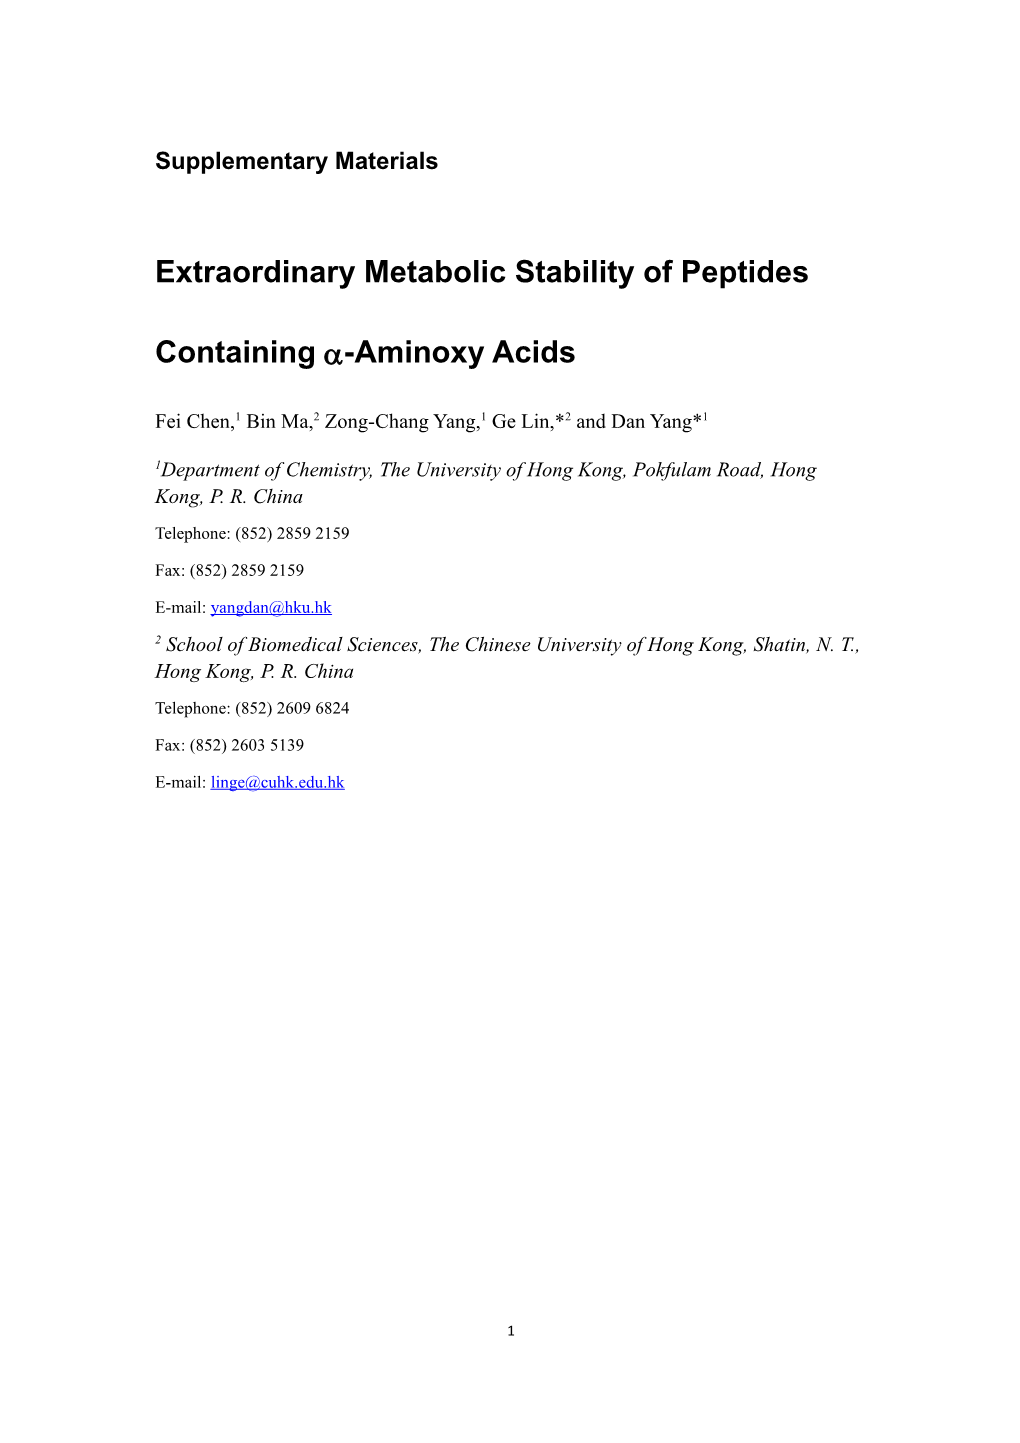 Extraordinary Metabolic Stability of Peptides Containing -Aminoxy Acids